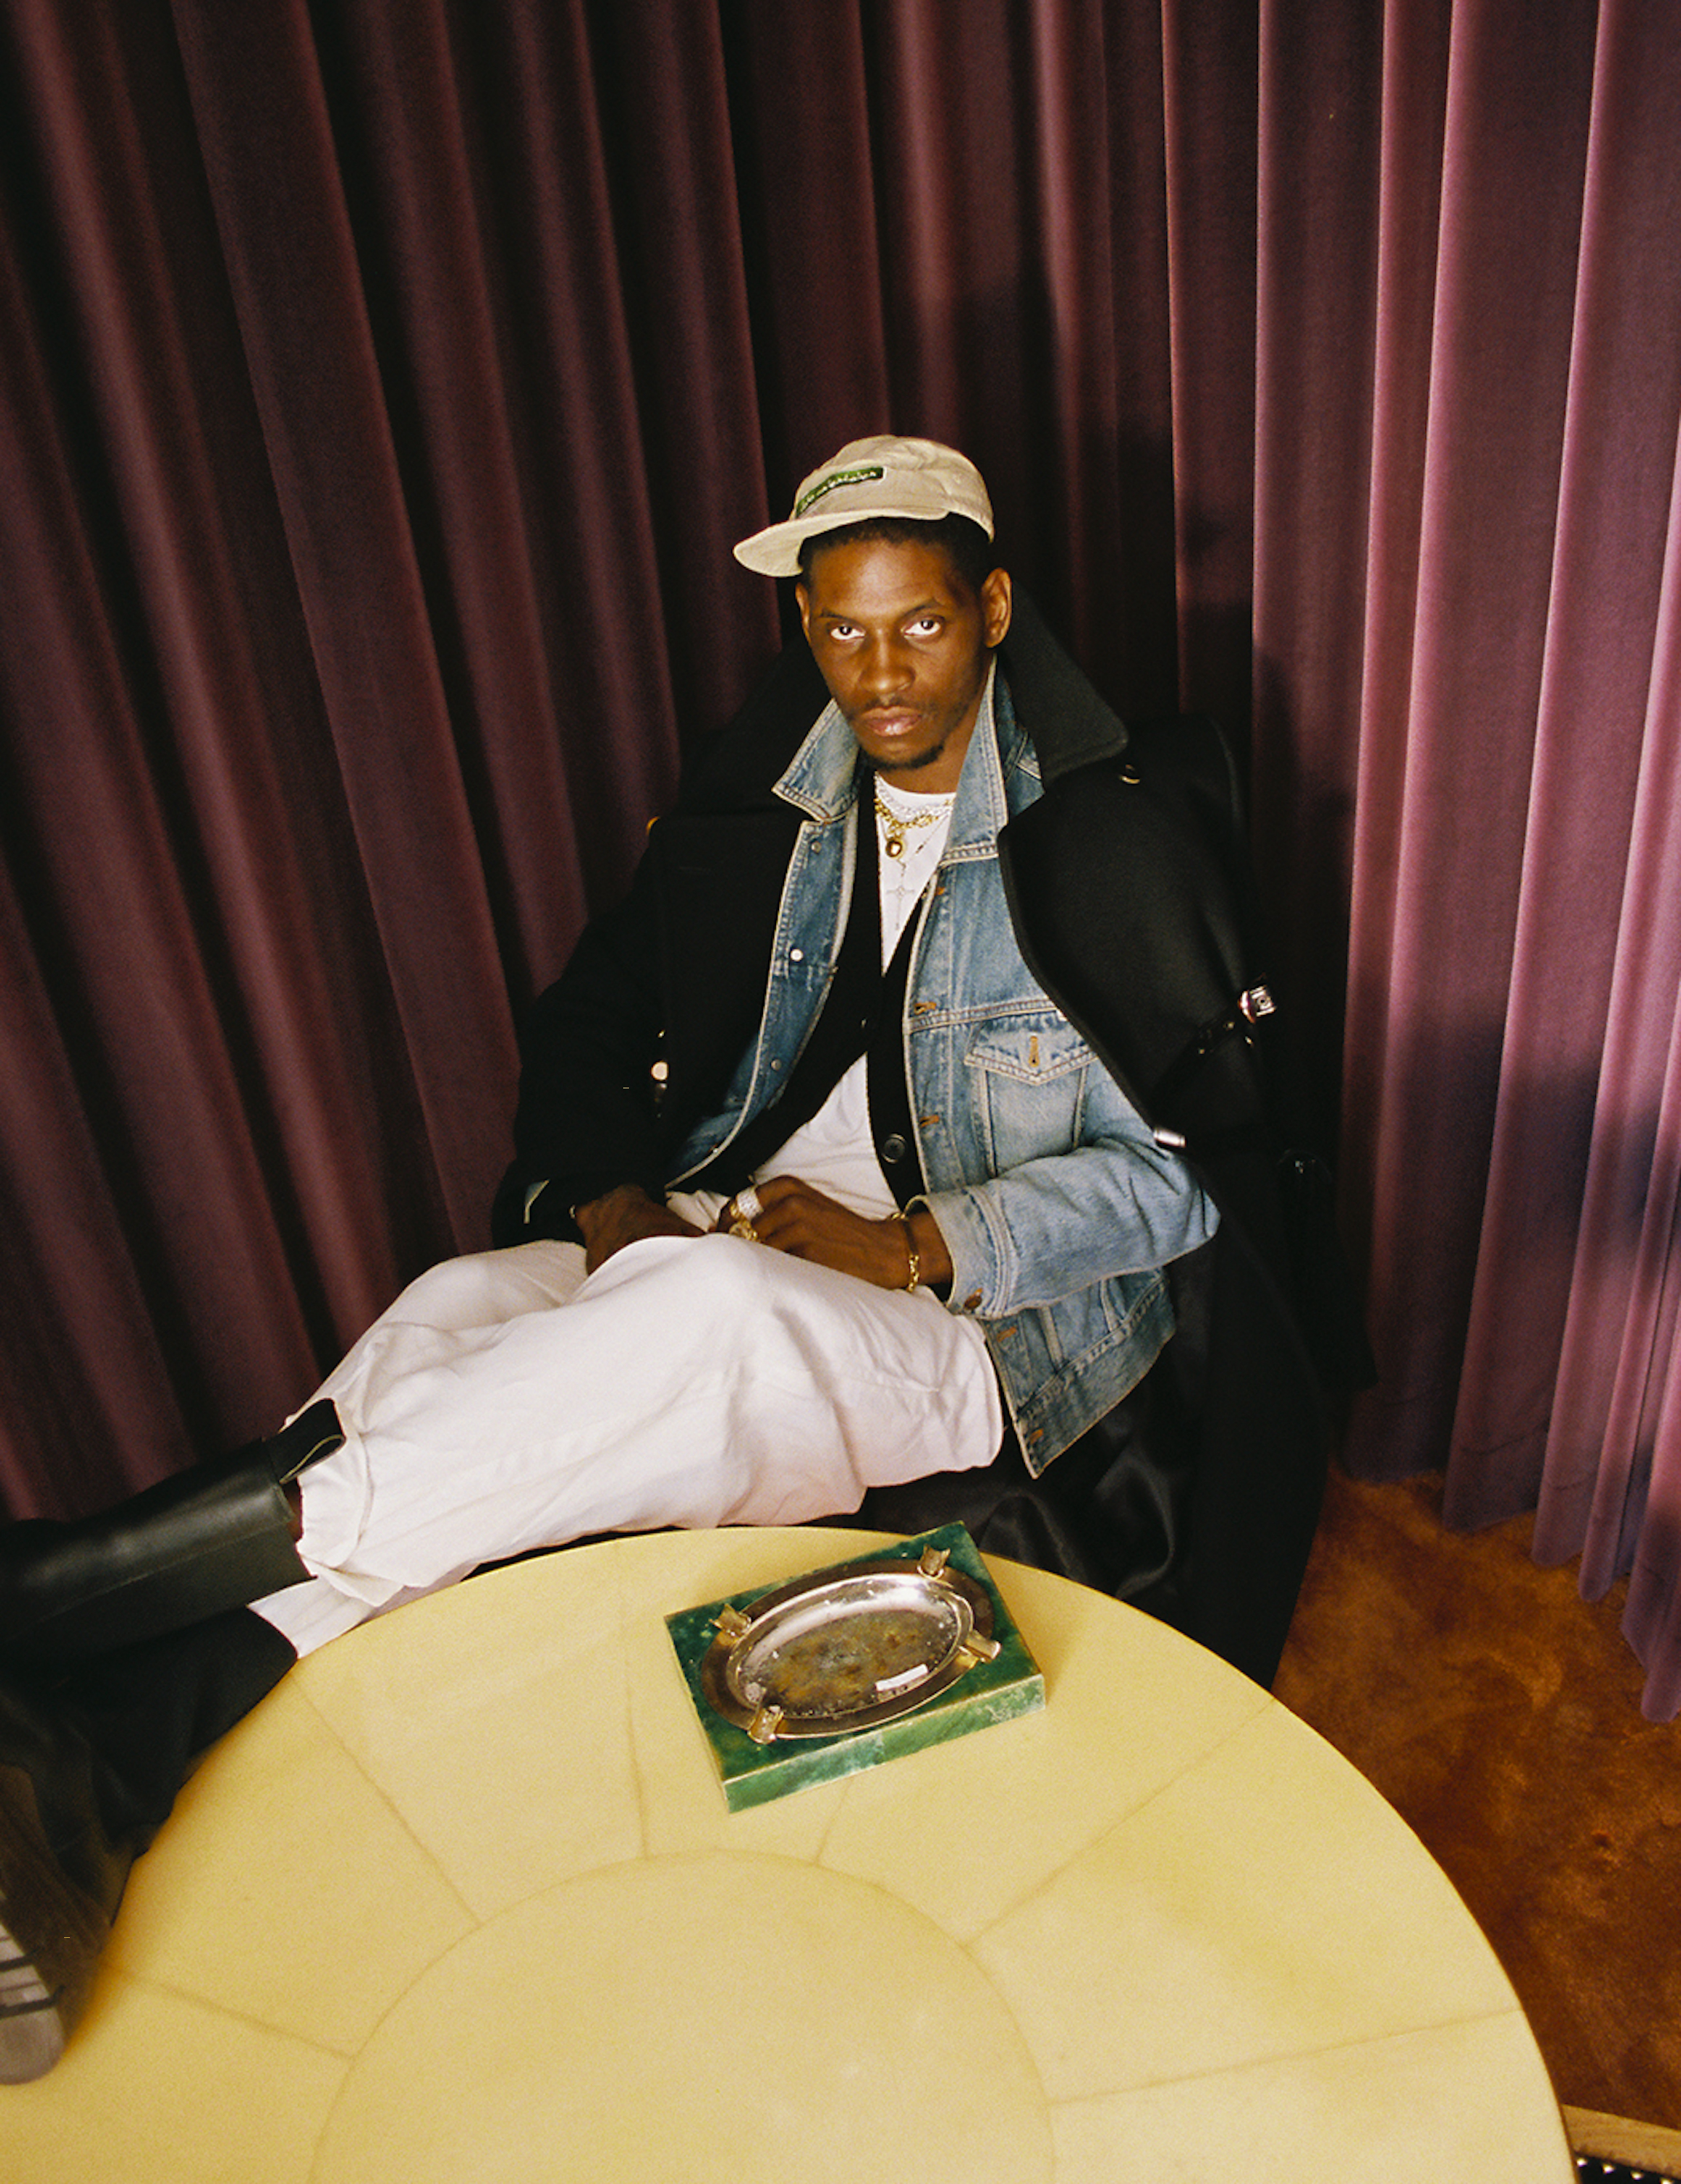 A$AP Nast sitting on a chair with his boots on a table photographed by Bladimir Corniel